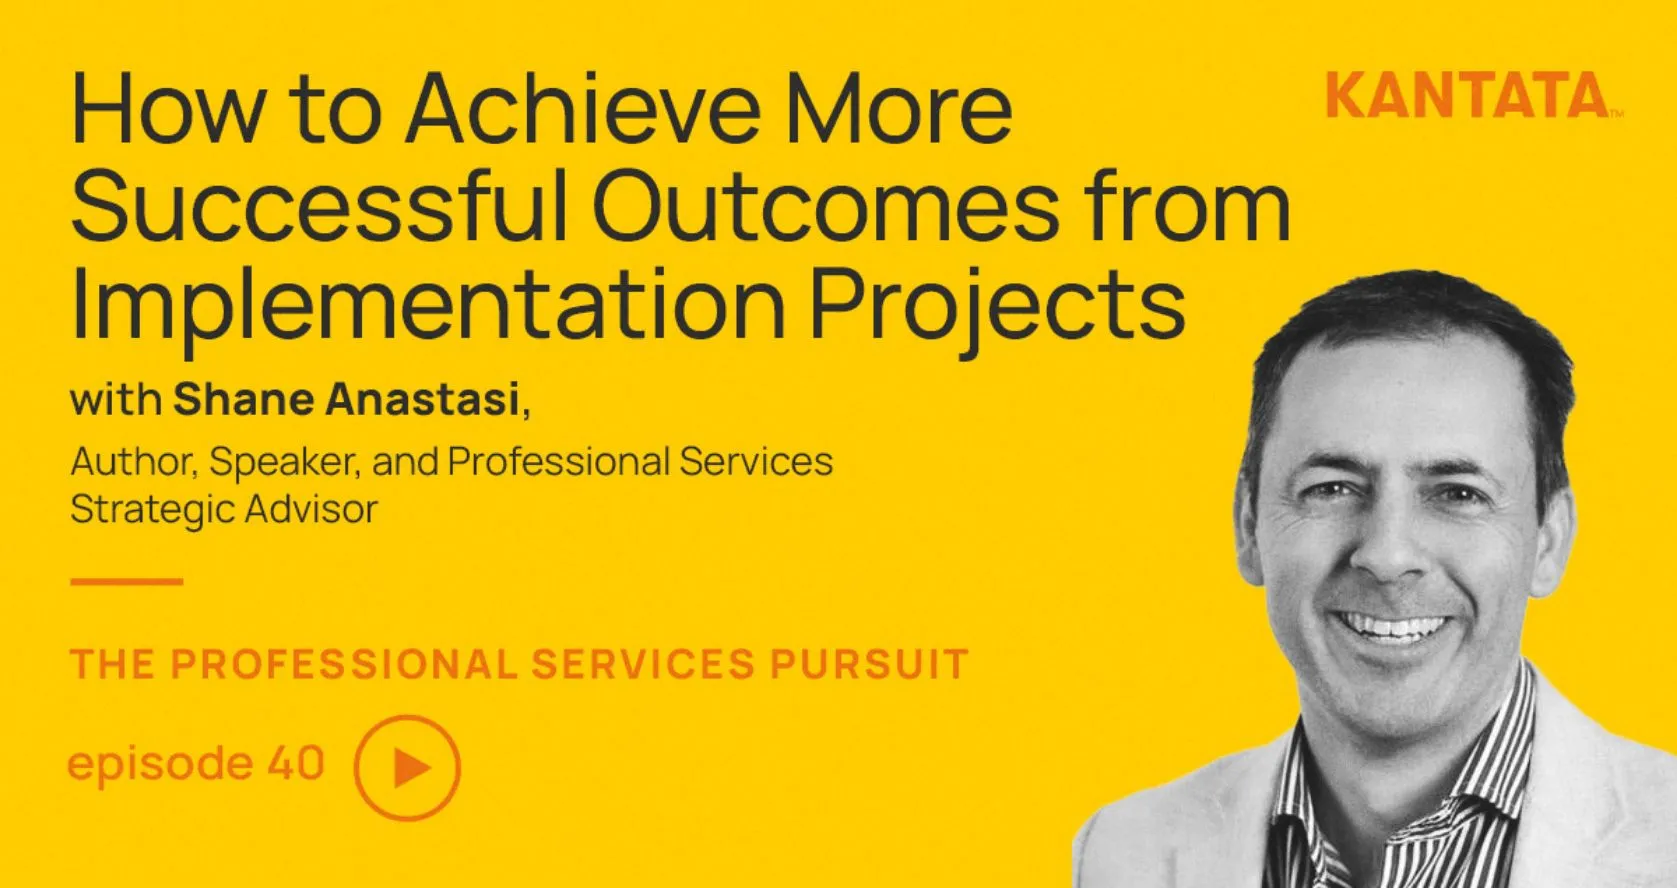 How To Achieve More Successful Outcomes from Implementation Projects w/ Shane Anastasi